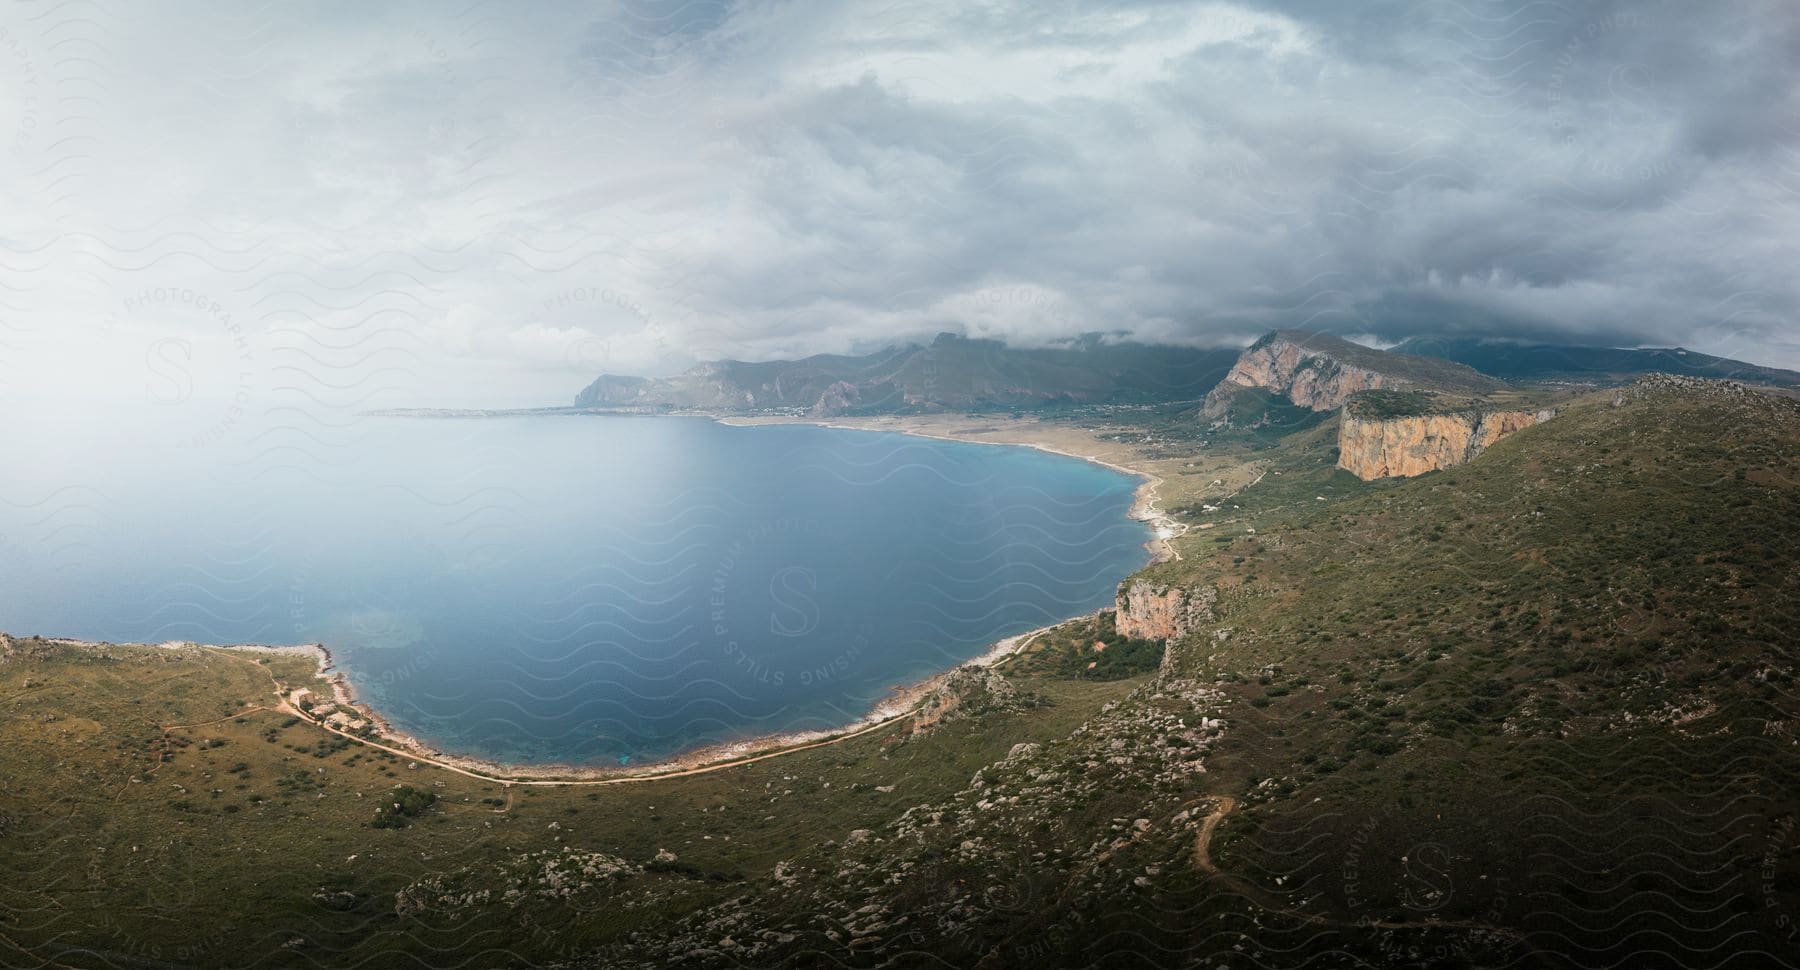 Aerial view of a mountainous shoreline with a lake and beach